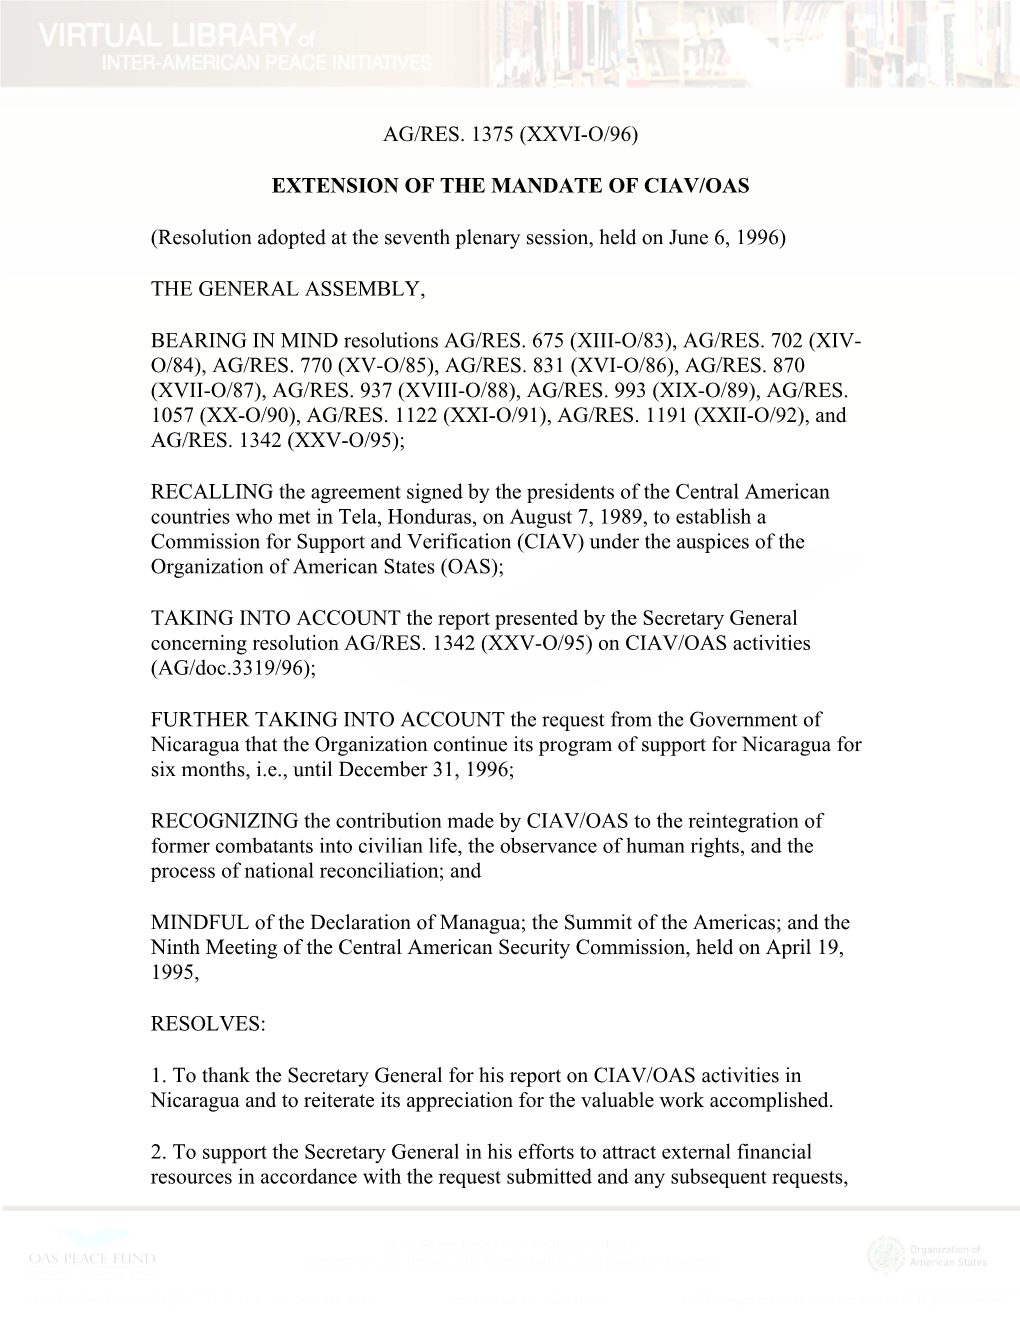 Extension of the Mandate of Ciav/Oas